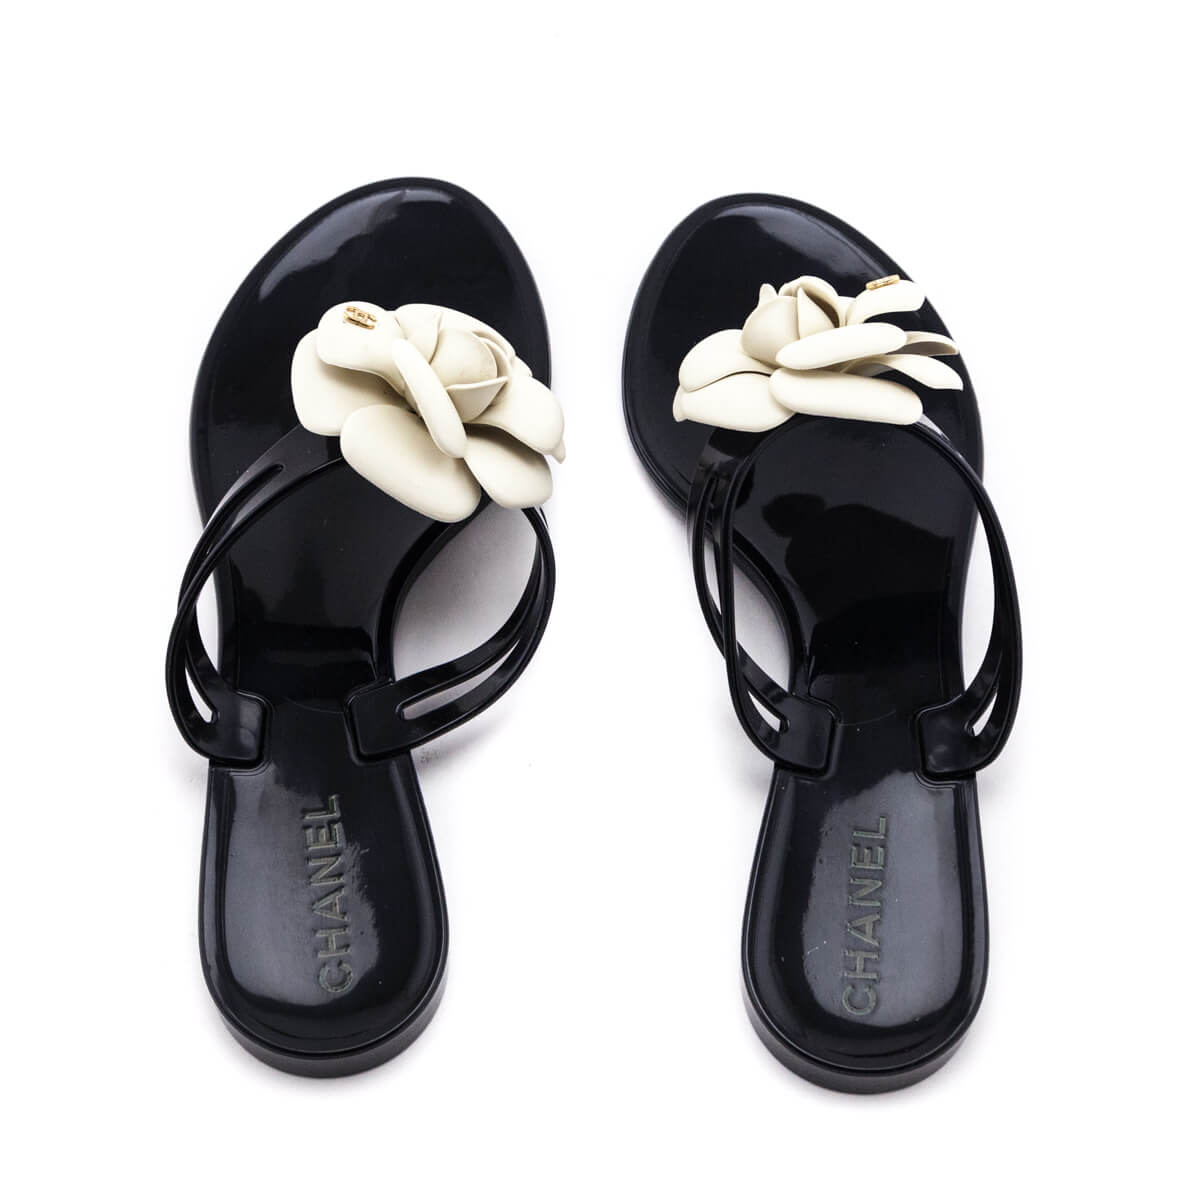 Chanel Black & Ivory Camellia Jelly Sandals Size US 8 | EU 38 - Love that Bag etc - Preowned Authentic Designer Handbags & Preloved Fashions